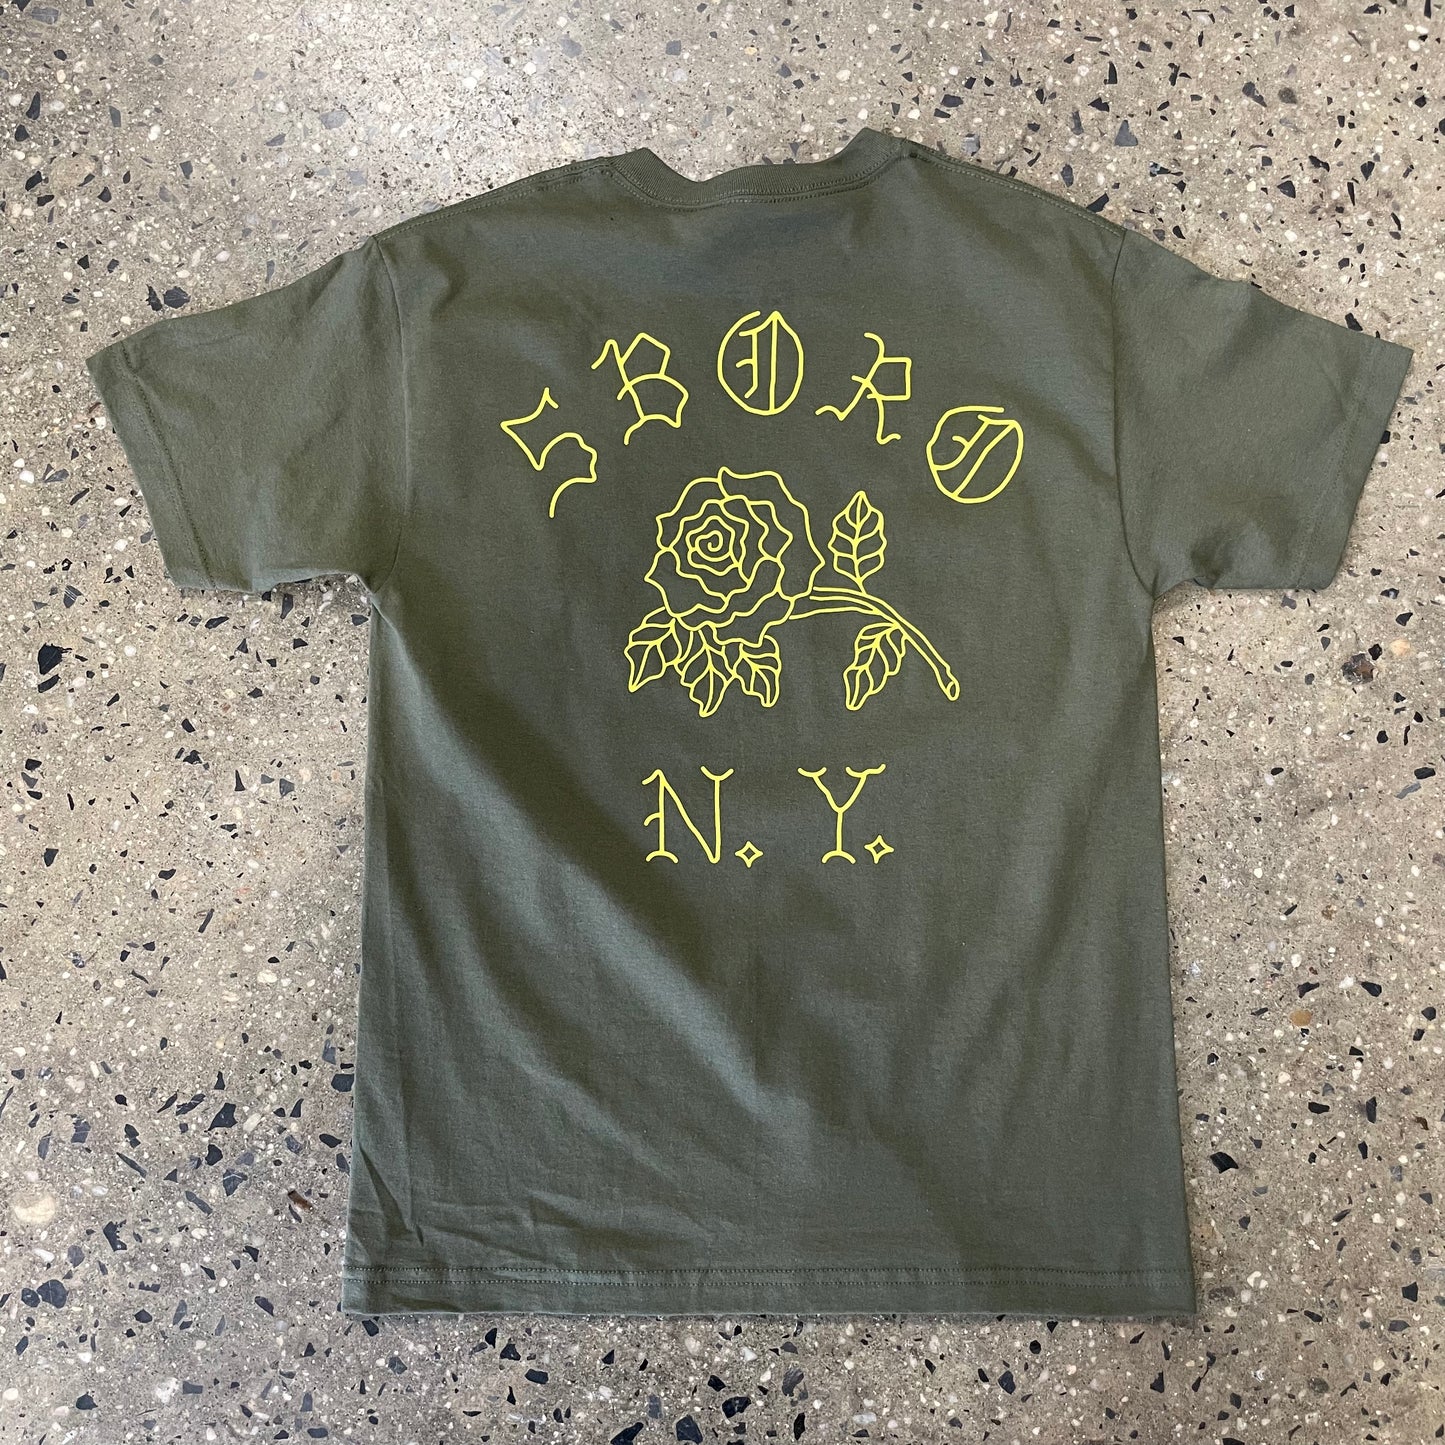 Large arch style back print with 5boro, a rose in the middle, and NY on the bottom line, yellow ink on an olive t-shirt